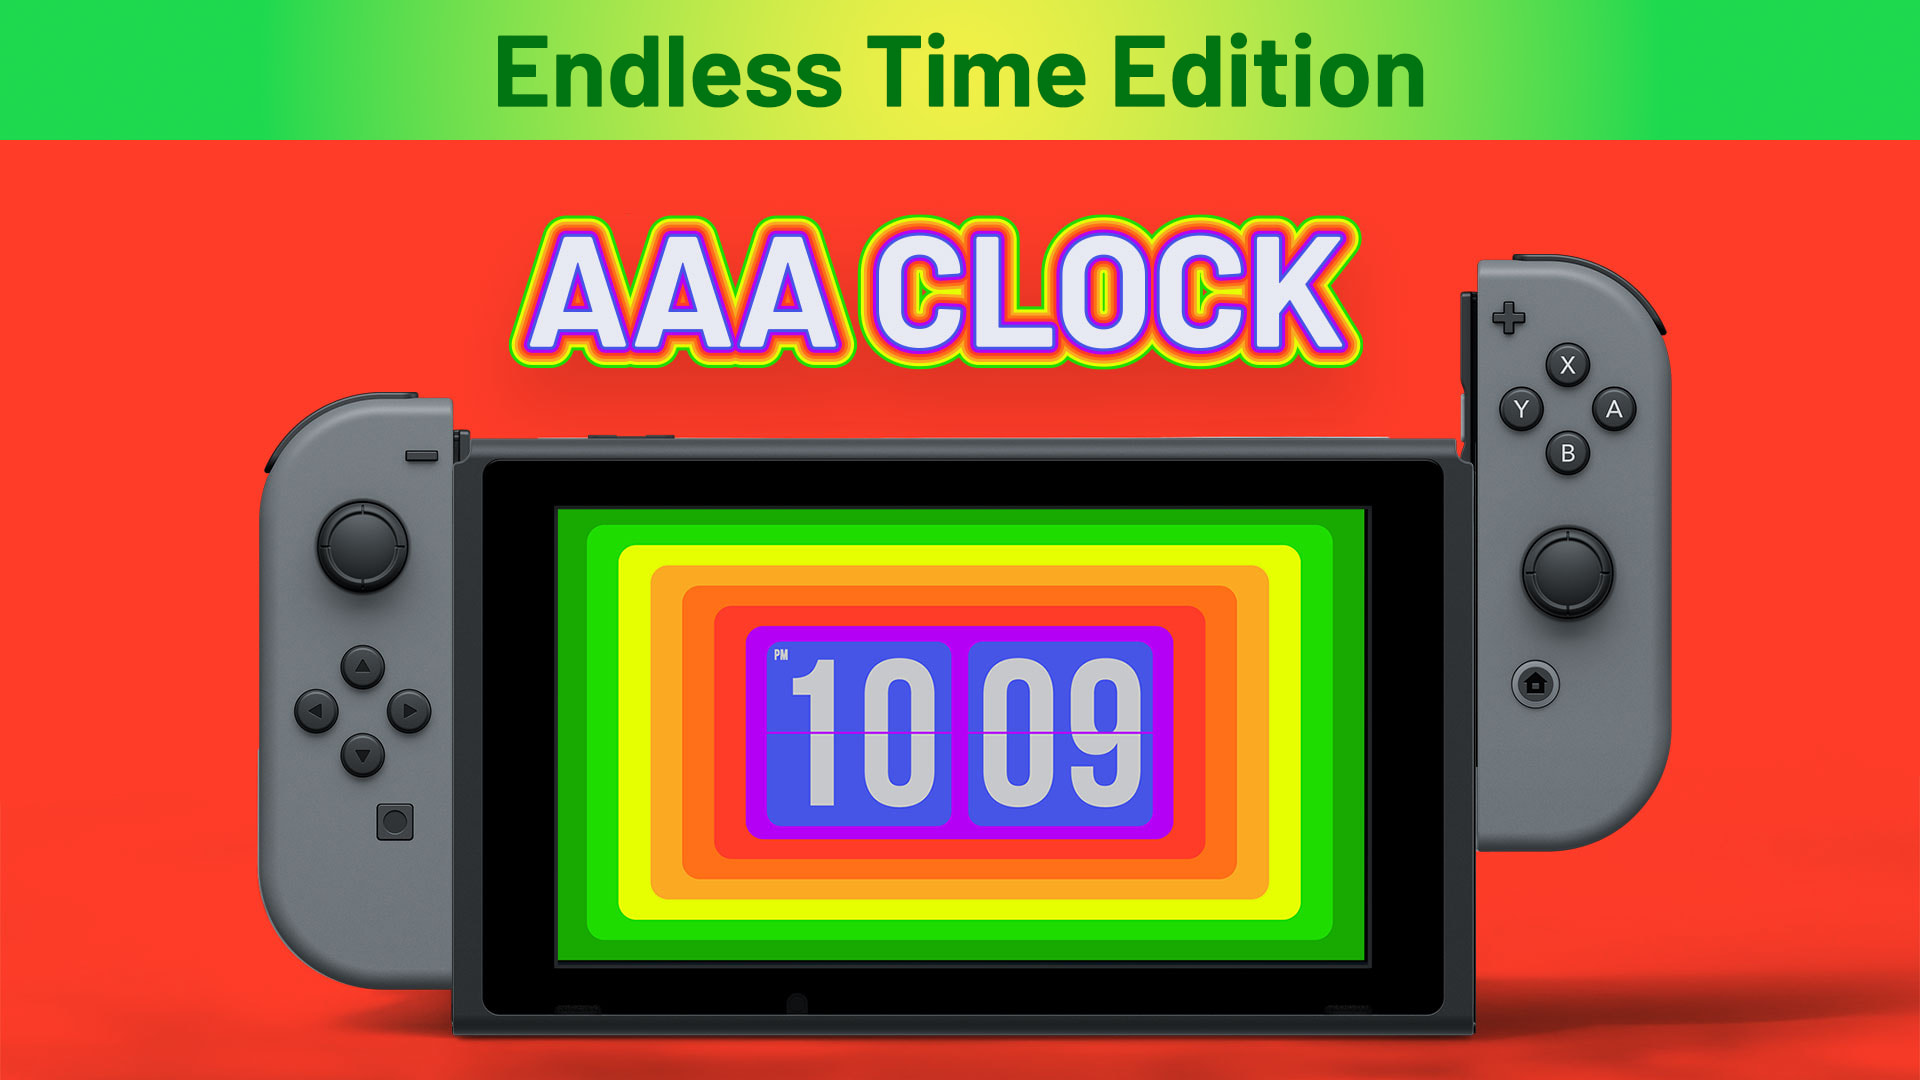 AAA Clock Endless Time Edition